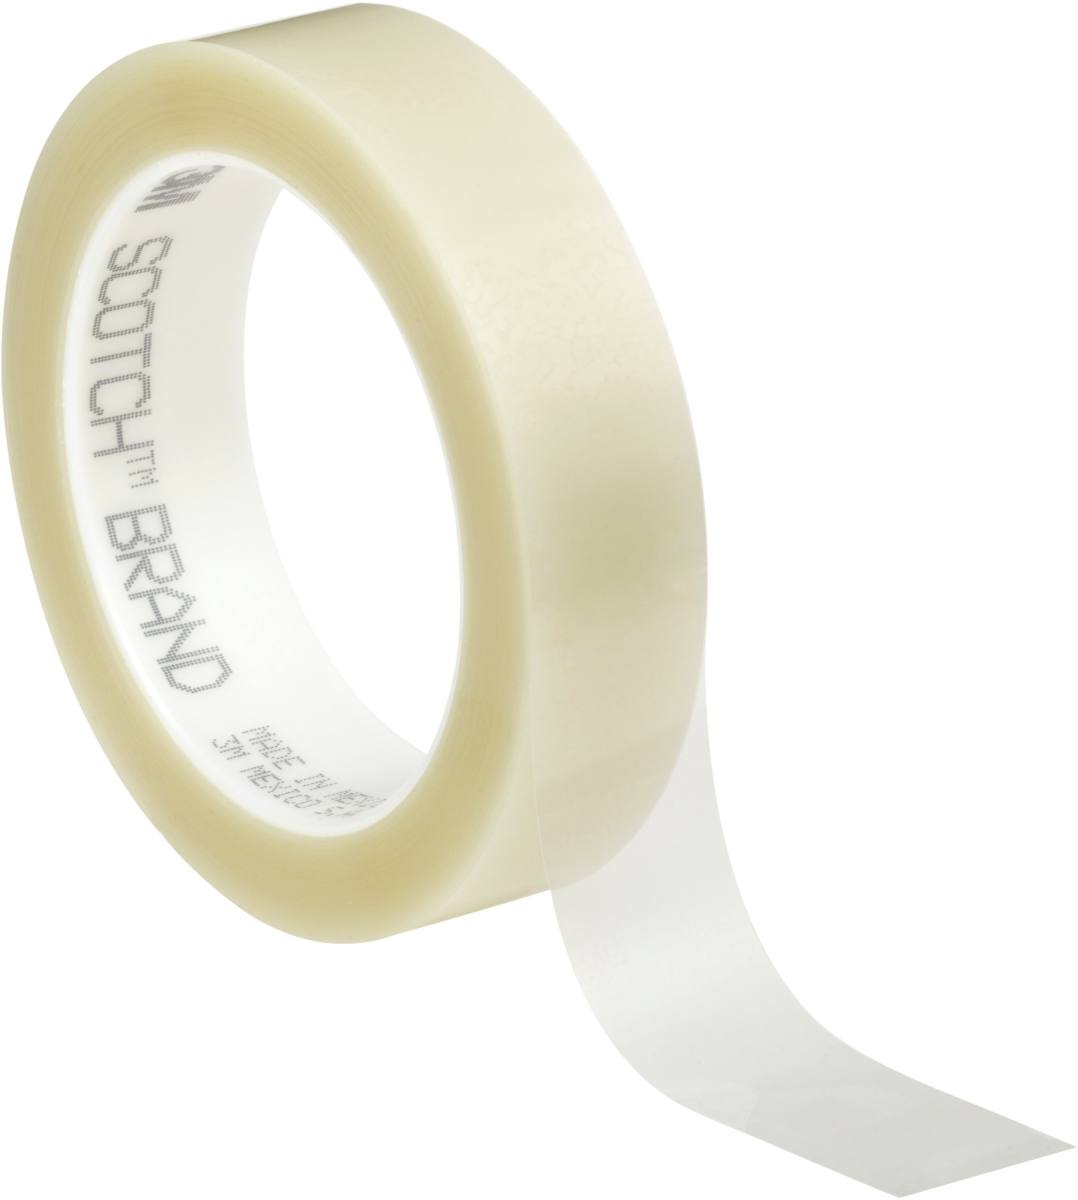 3M polyester adhesive tape 850 T, transparent, 12 mm x 66 m, 0.05 mm